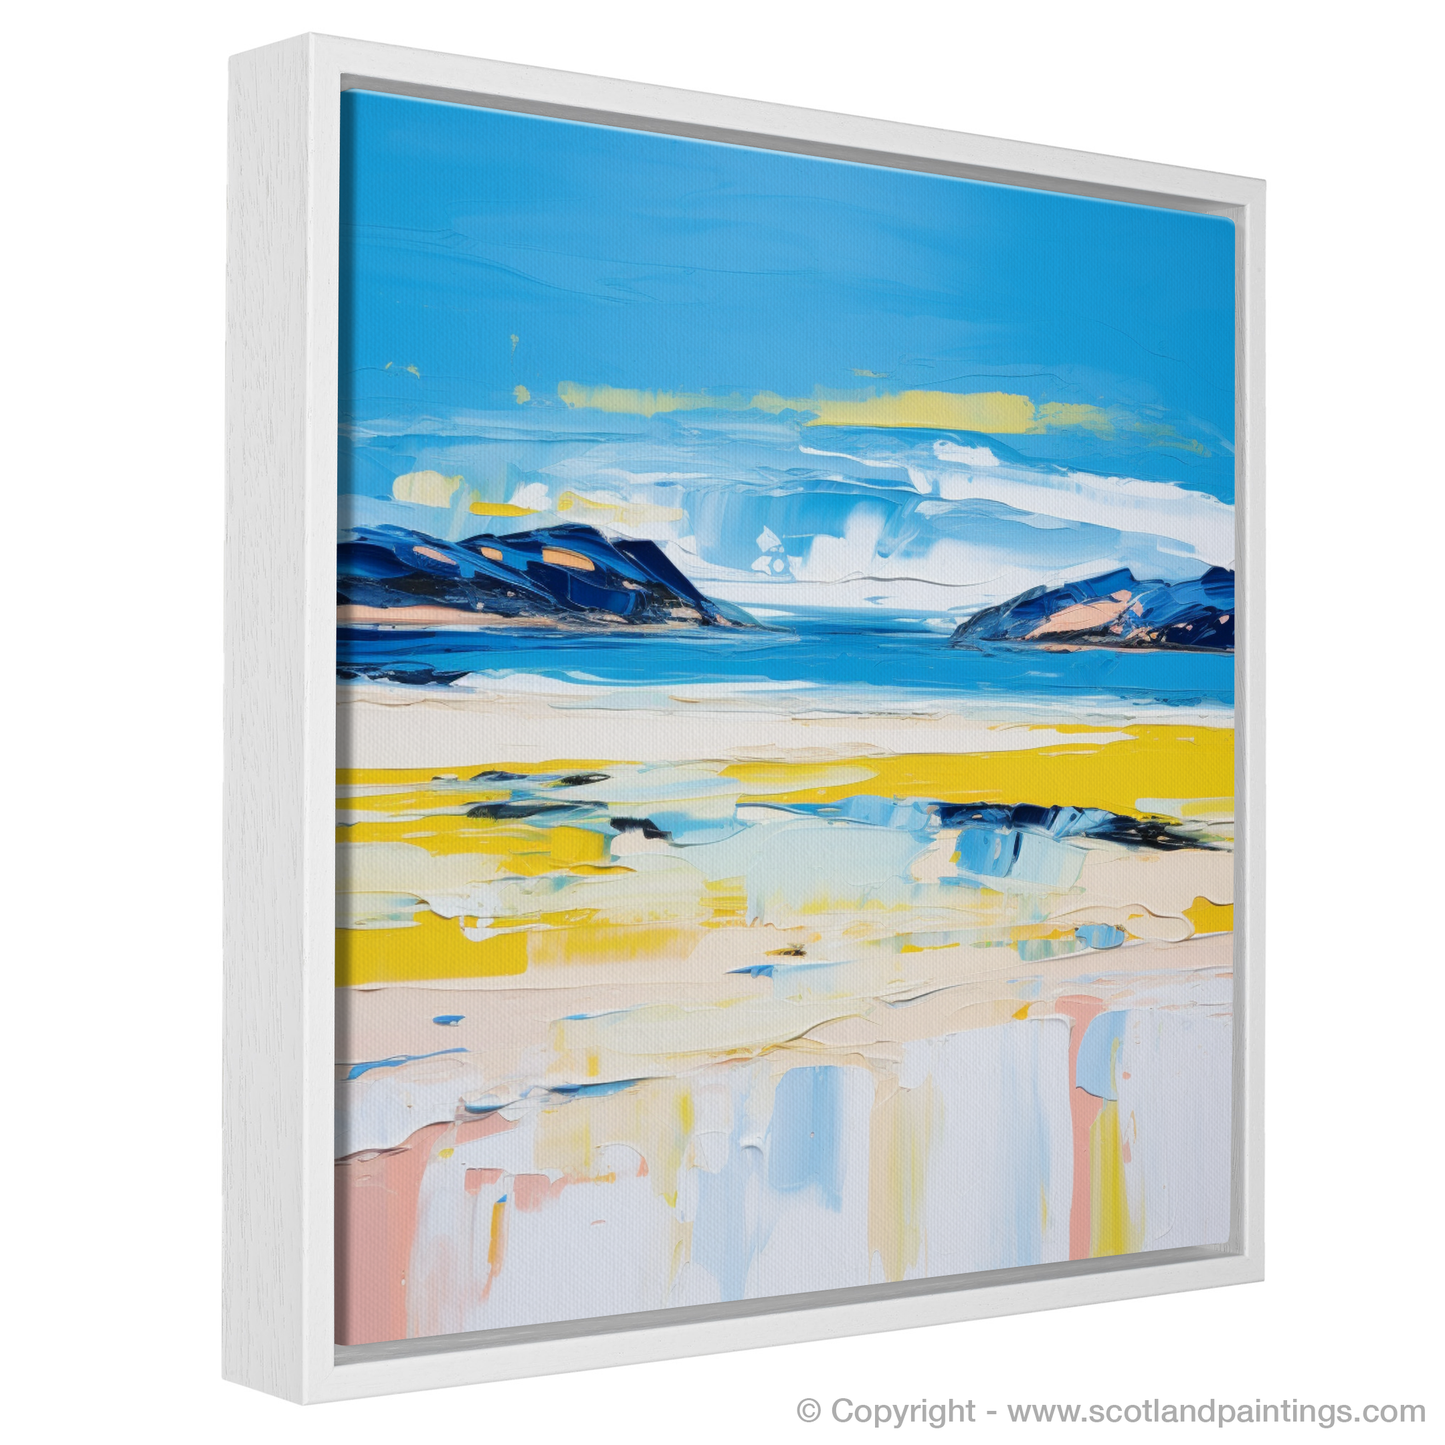 Painting and Art Print of Durness Beach, Sutherland in summer entitled "Summer Symphony of Durness Beach".